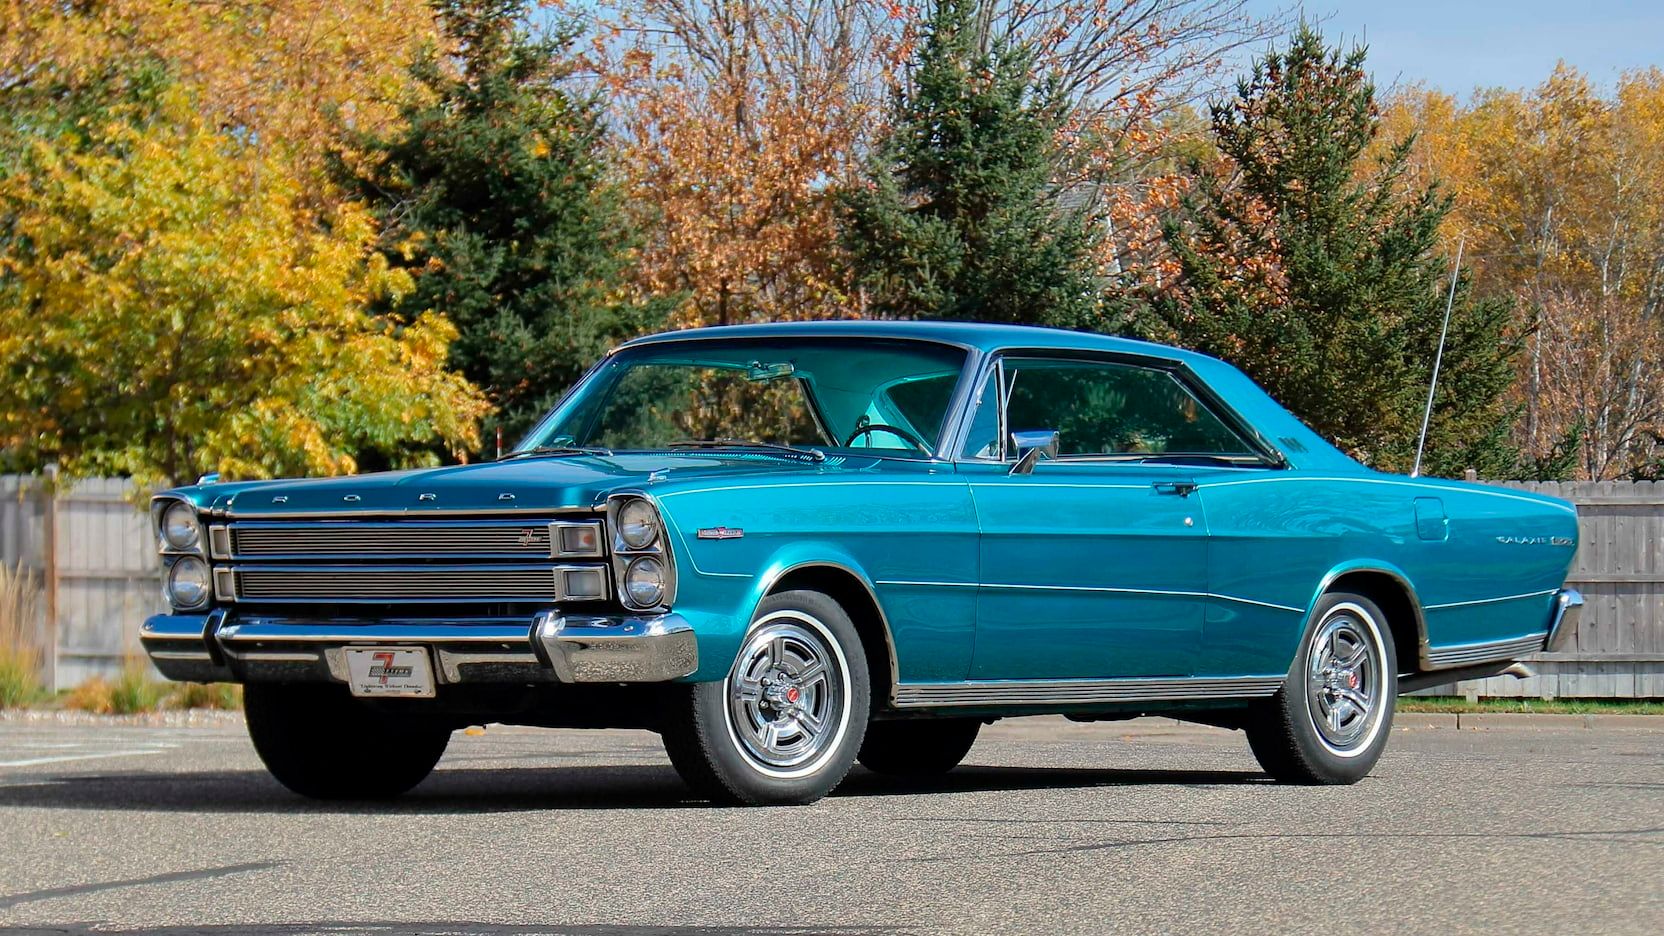 A parked 1966 Ford Galaxie 500 7 Litre 